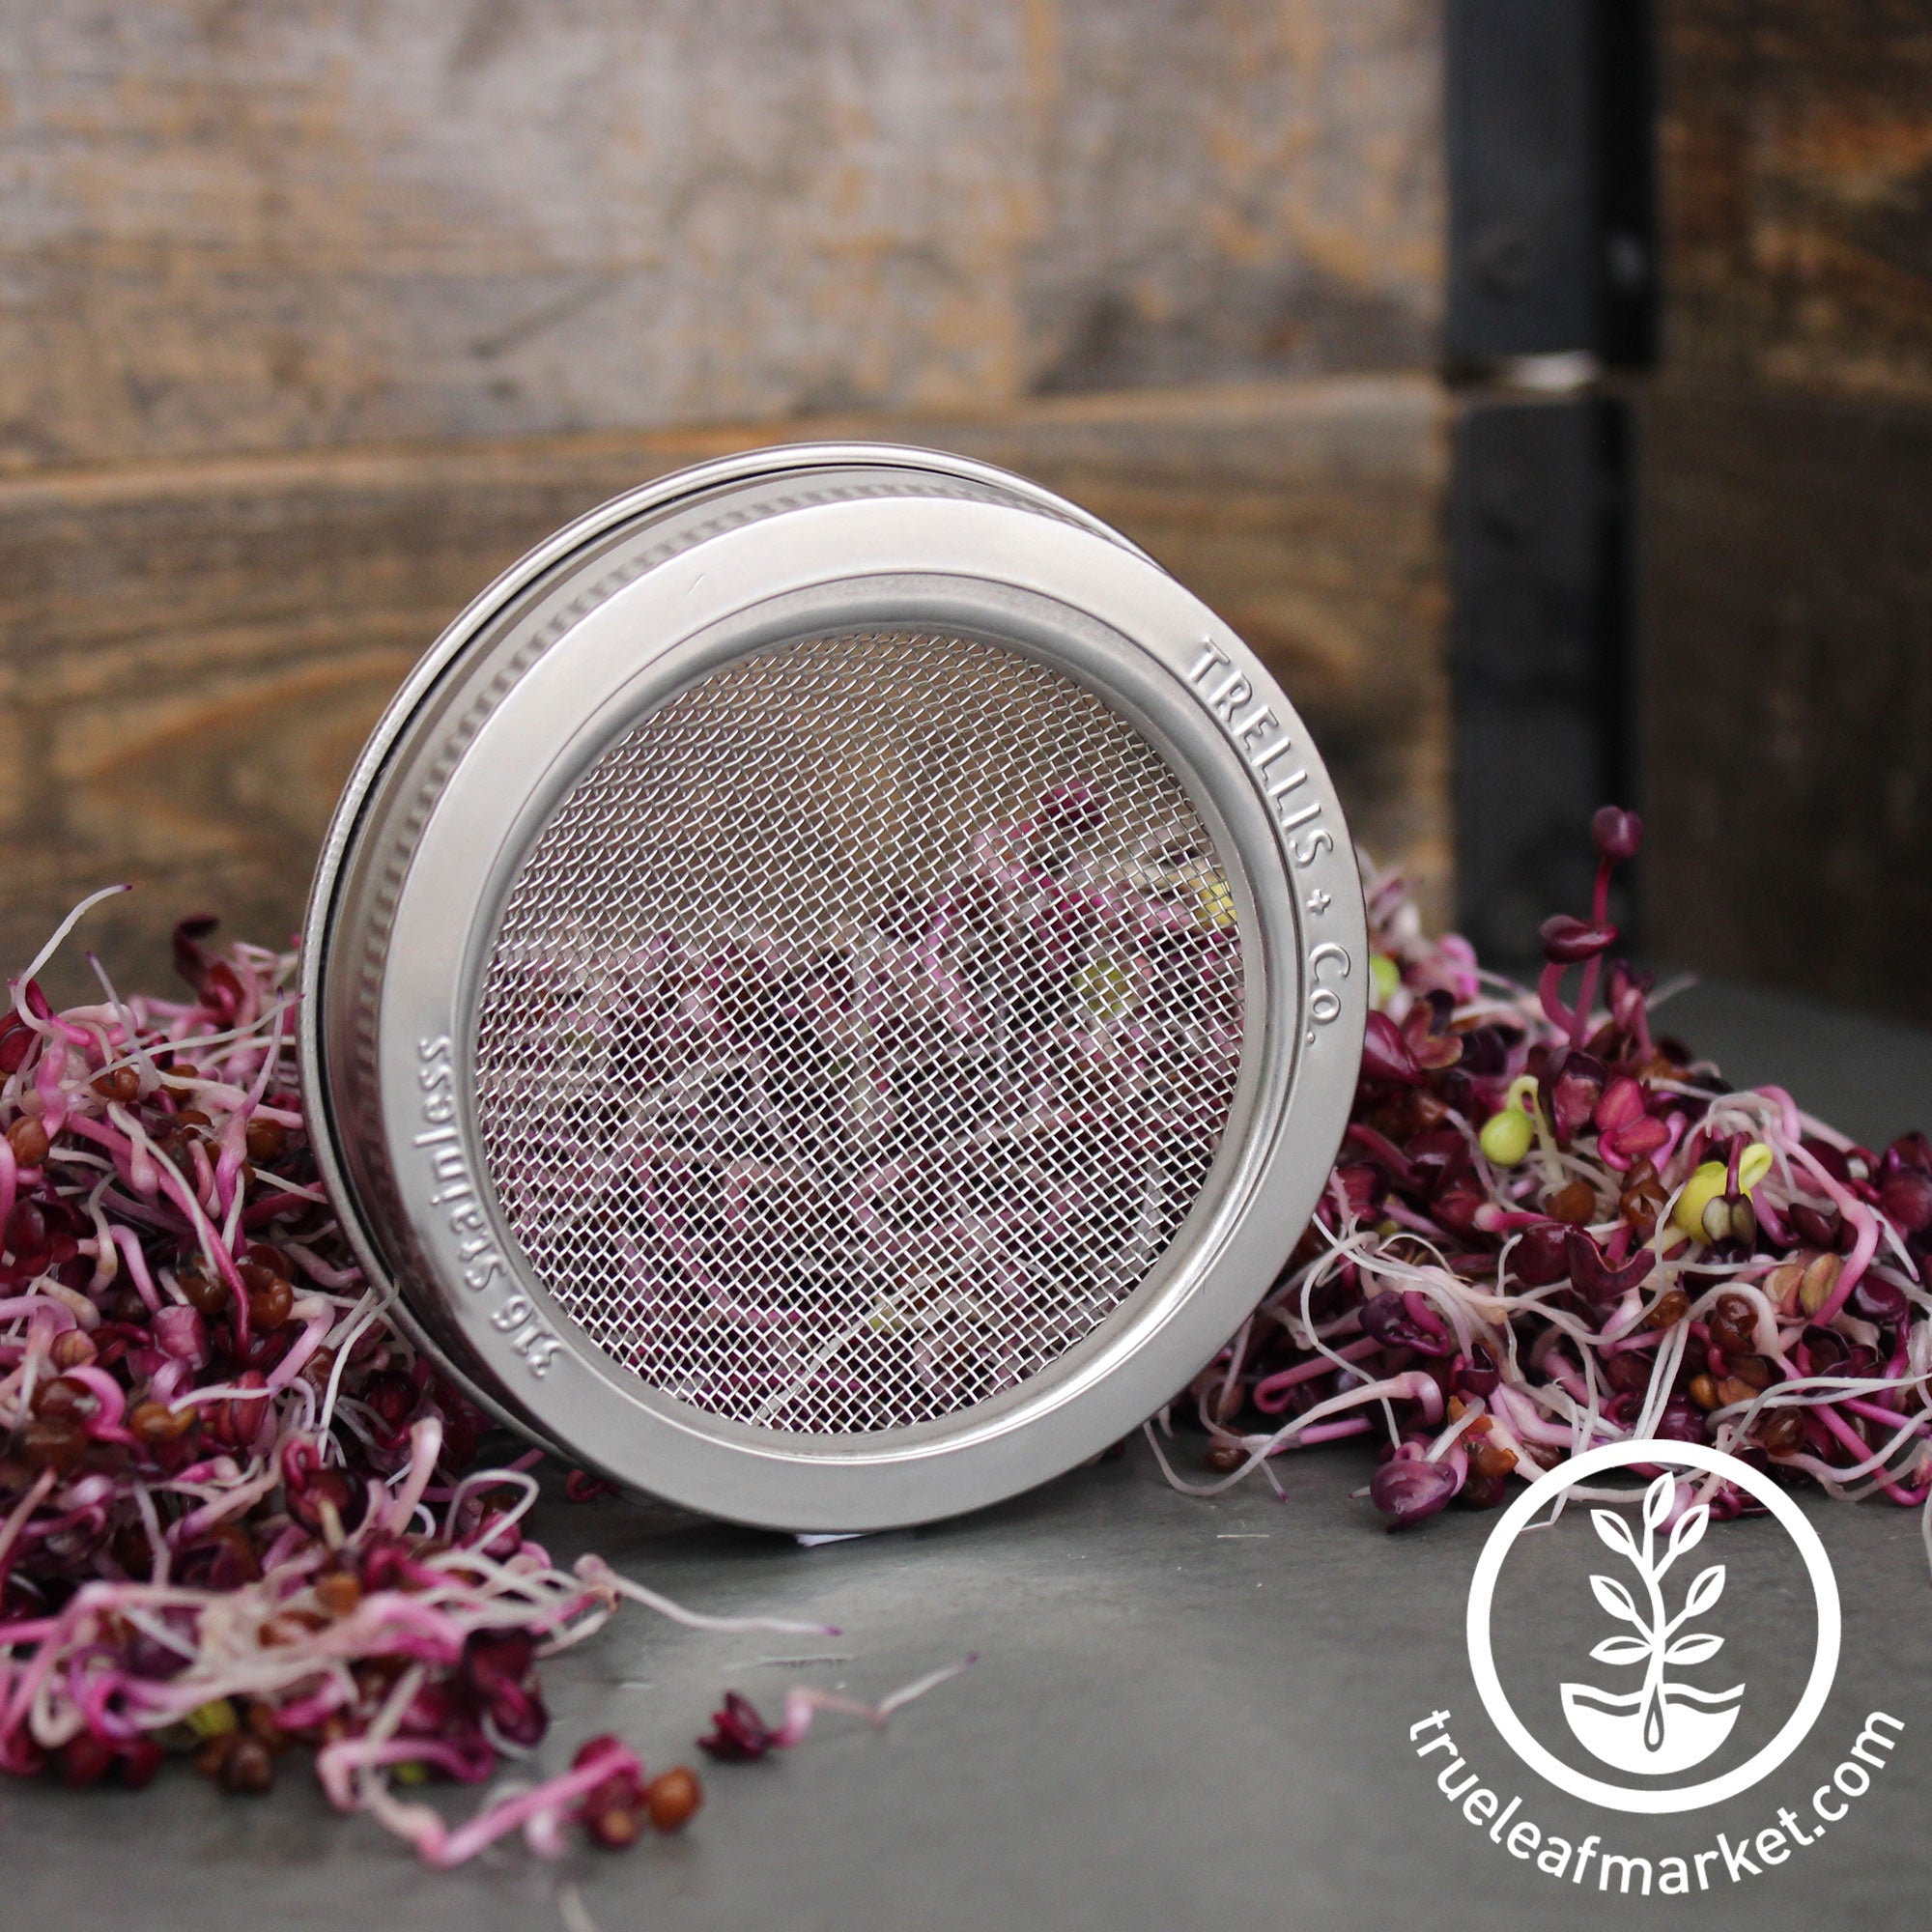 Trellis Stainless Steel Sprouting Lid